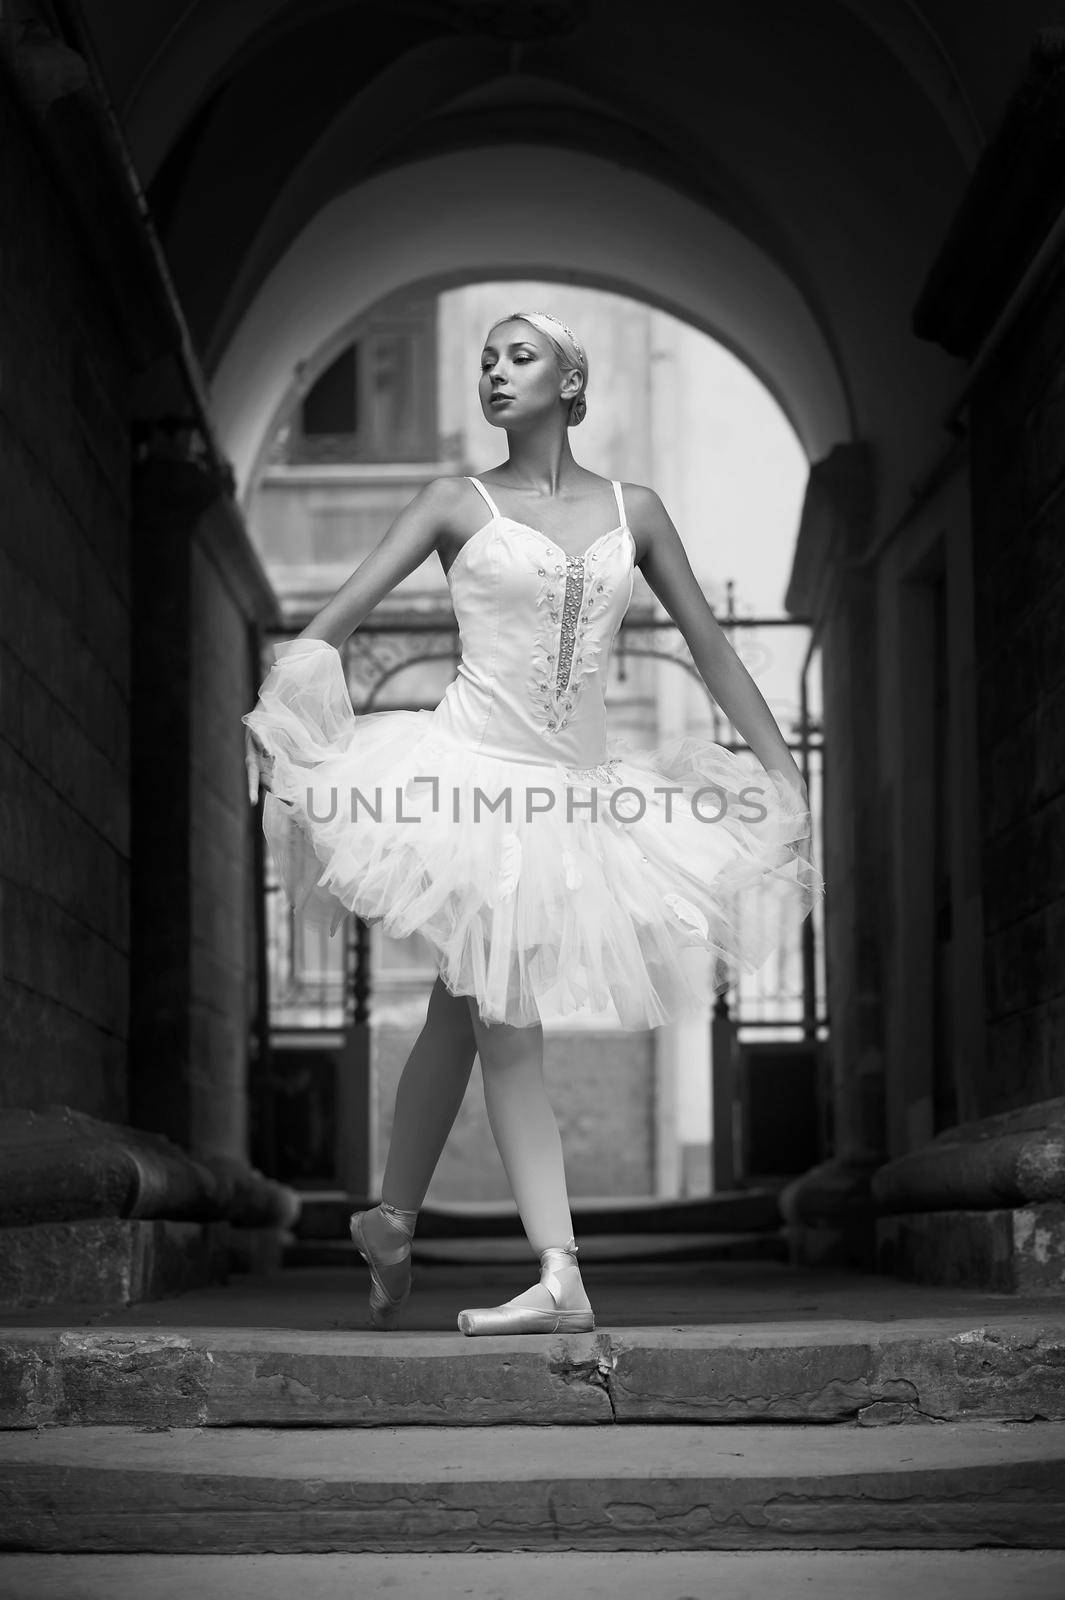 Dancing on the streets. Monochrome portrait of a beautiful ballerina standing in an archway